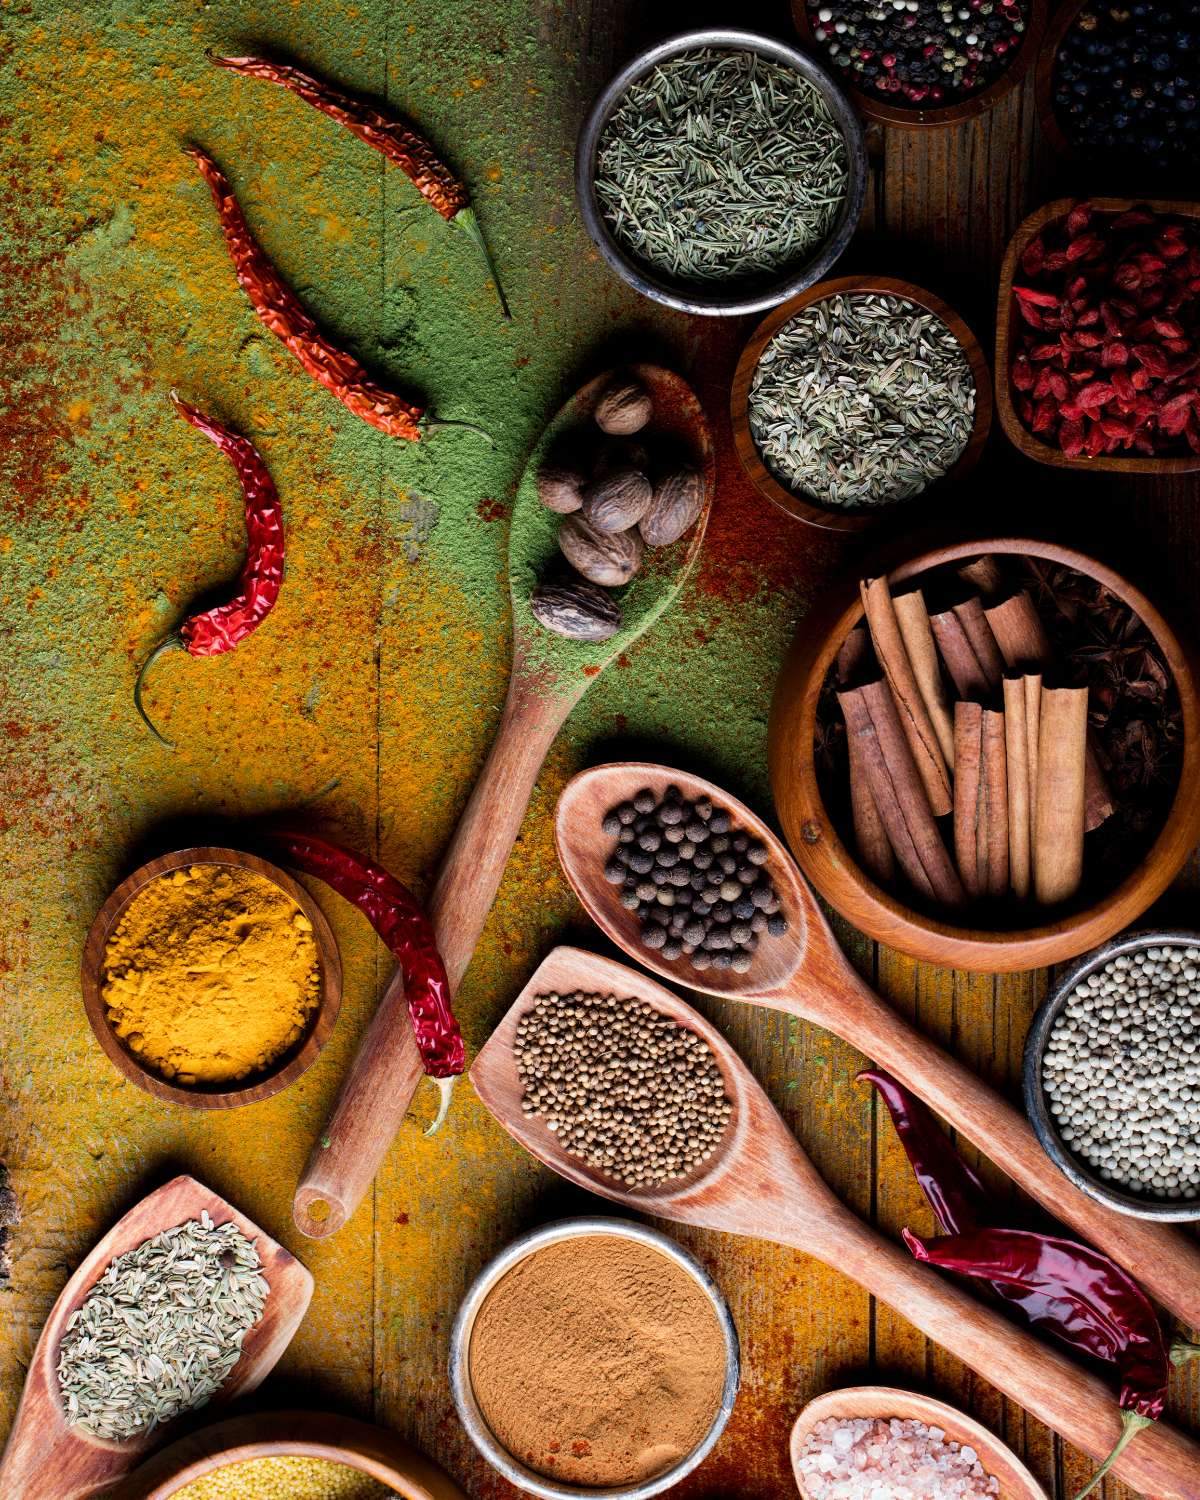 Spices on wooden spoons and in wooden bowls, along with dried chillies.